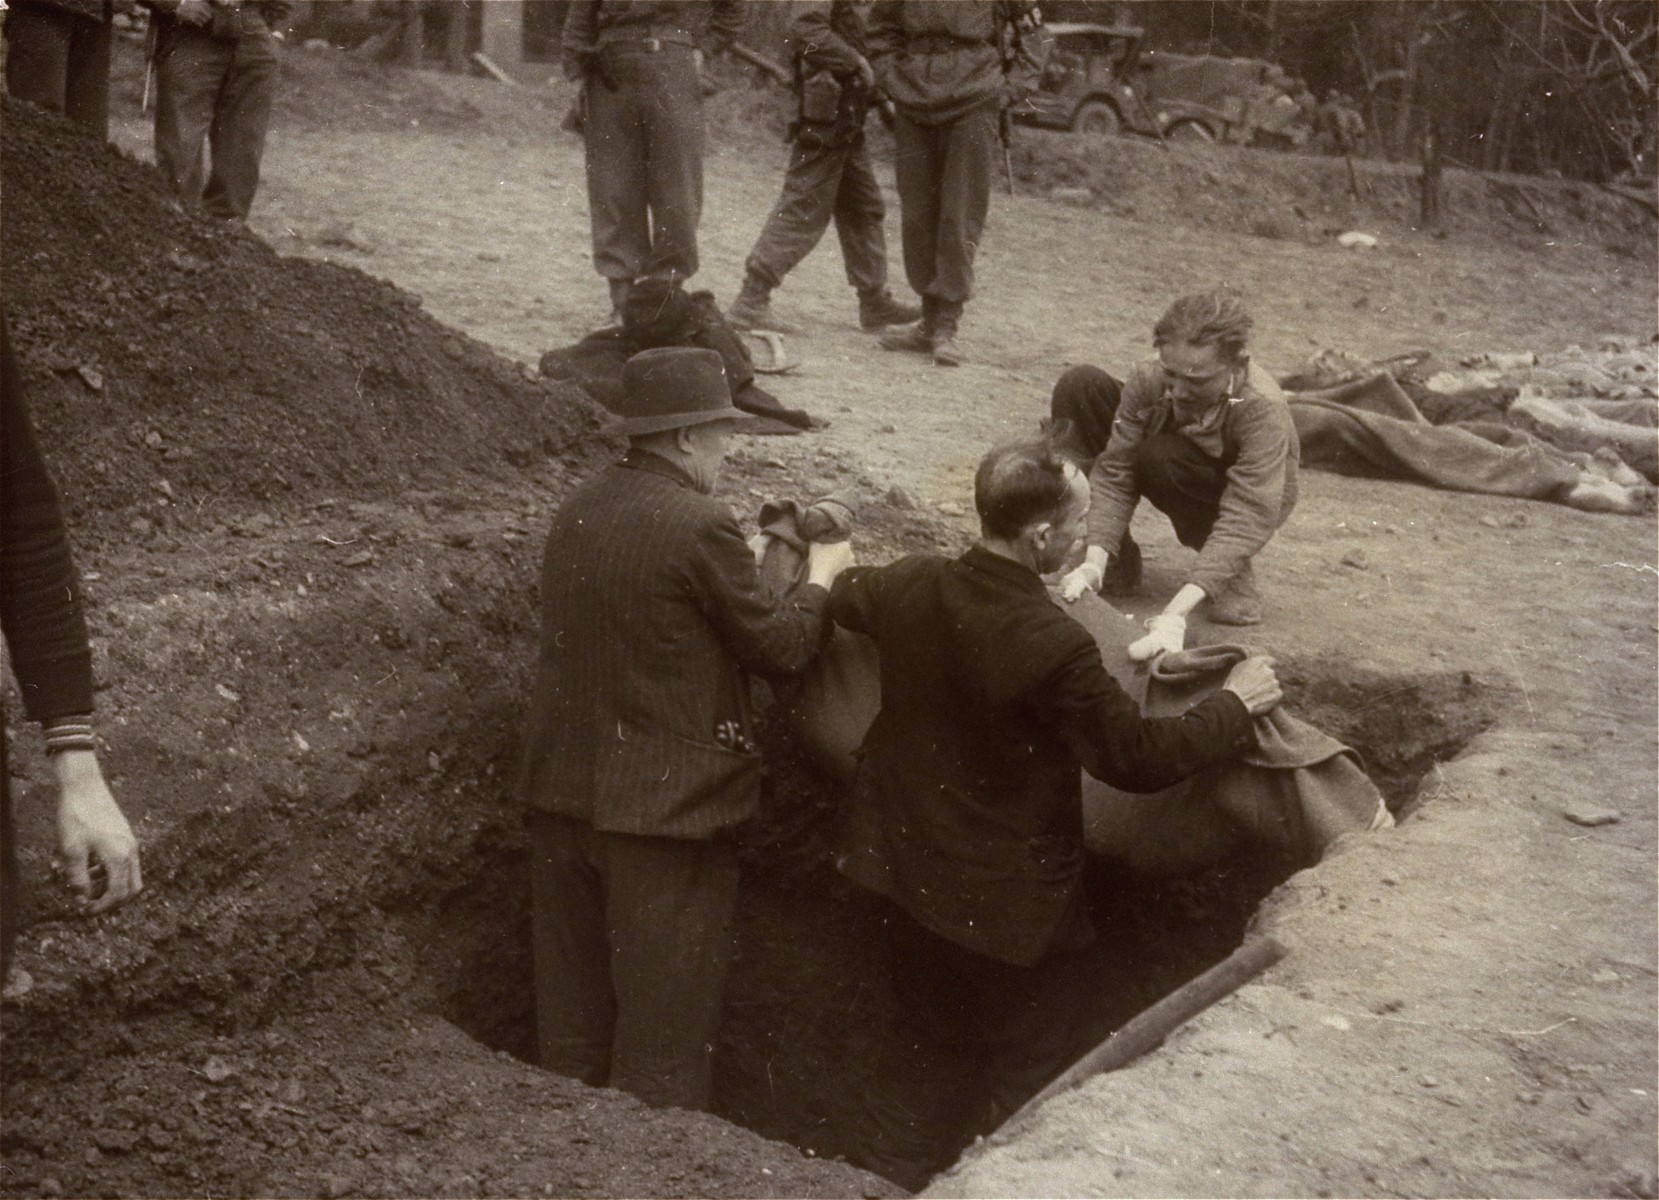 A Polish man, Walter Kallaur and his son, Michael, bury the boy's grandmother, Elizabeth Kallaur who died in the Nordhausen concentration camp, as American soldiers look on.  

Elizabeth's head had been severed shortly before liberation.  The Kallaur family was sent to Nordhausen as punishment for helping Jews in the Pinsk region.

These survivors would not allow the Germans to touch their dead, even after Colonel D.B. Hardin ordered the civilian population of the town of Nordhausen to bury the corpses of prisoners found in the Nordhausen concentration camp.